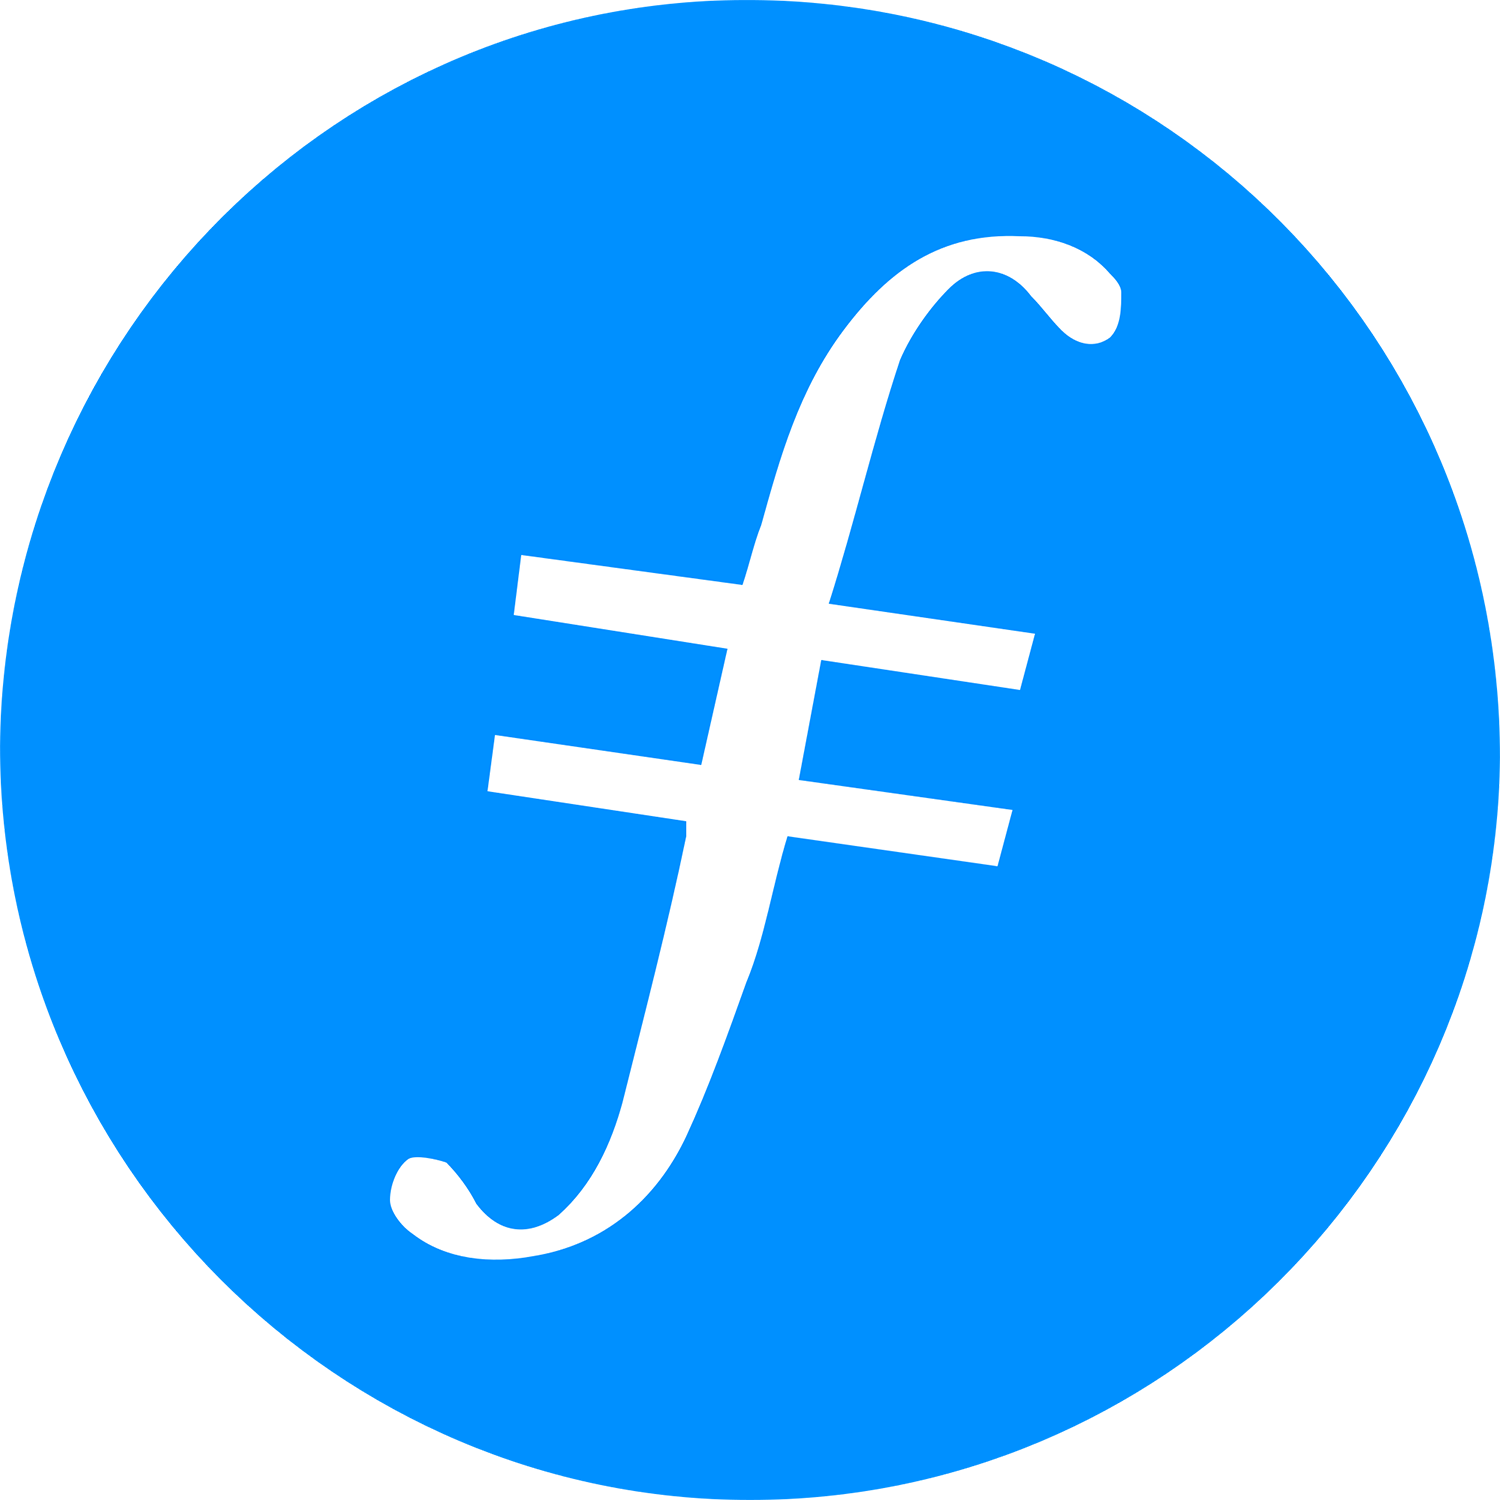 Image of Filecoin logo icon - a blue circle with a lower-cased "f" with two strokes across the center, resembling a currency symbol.